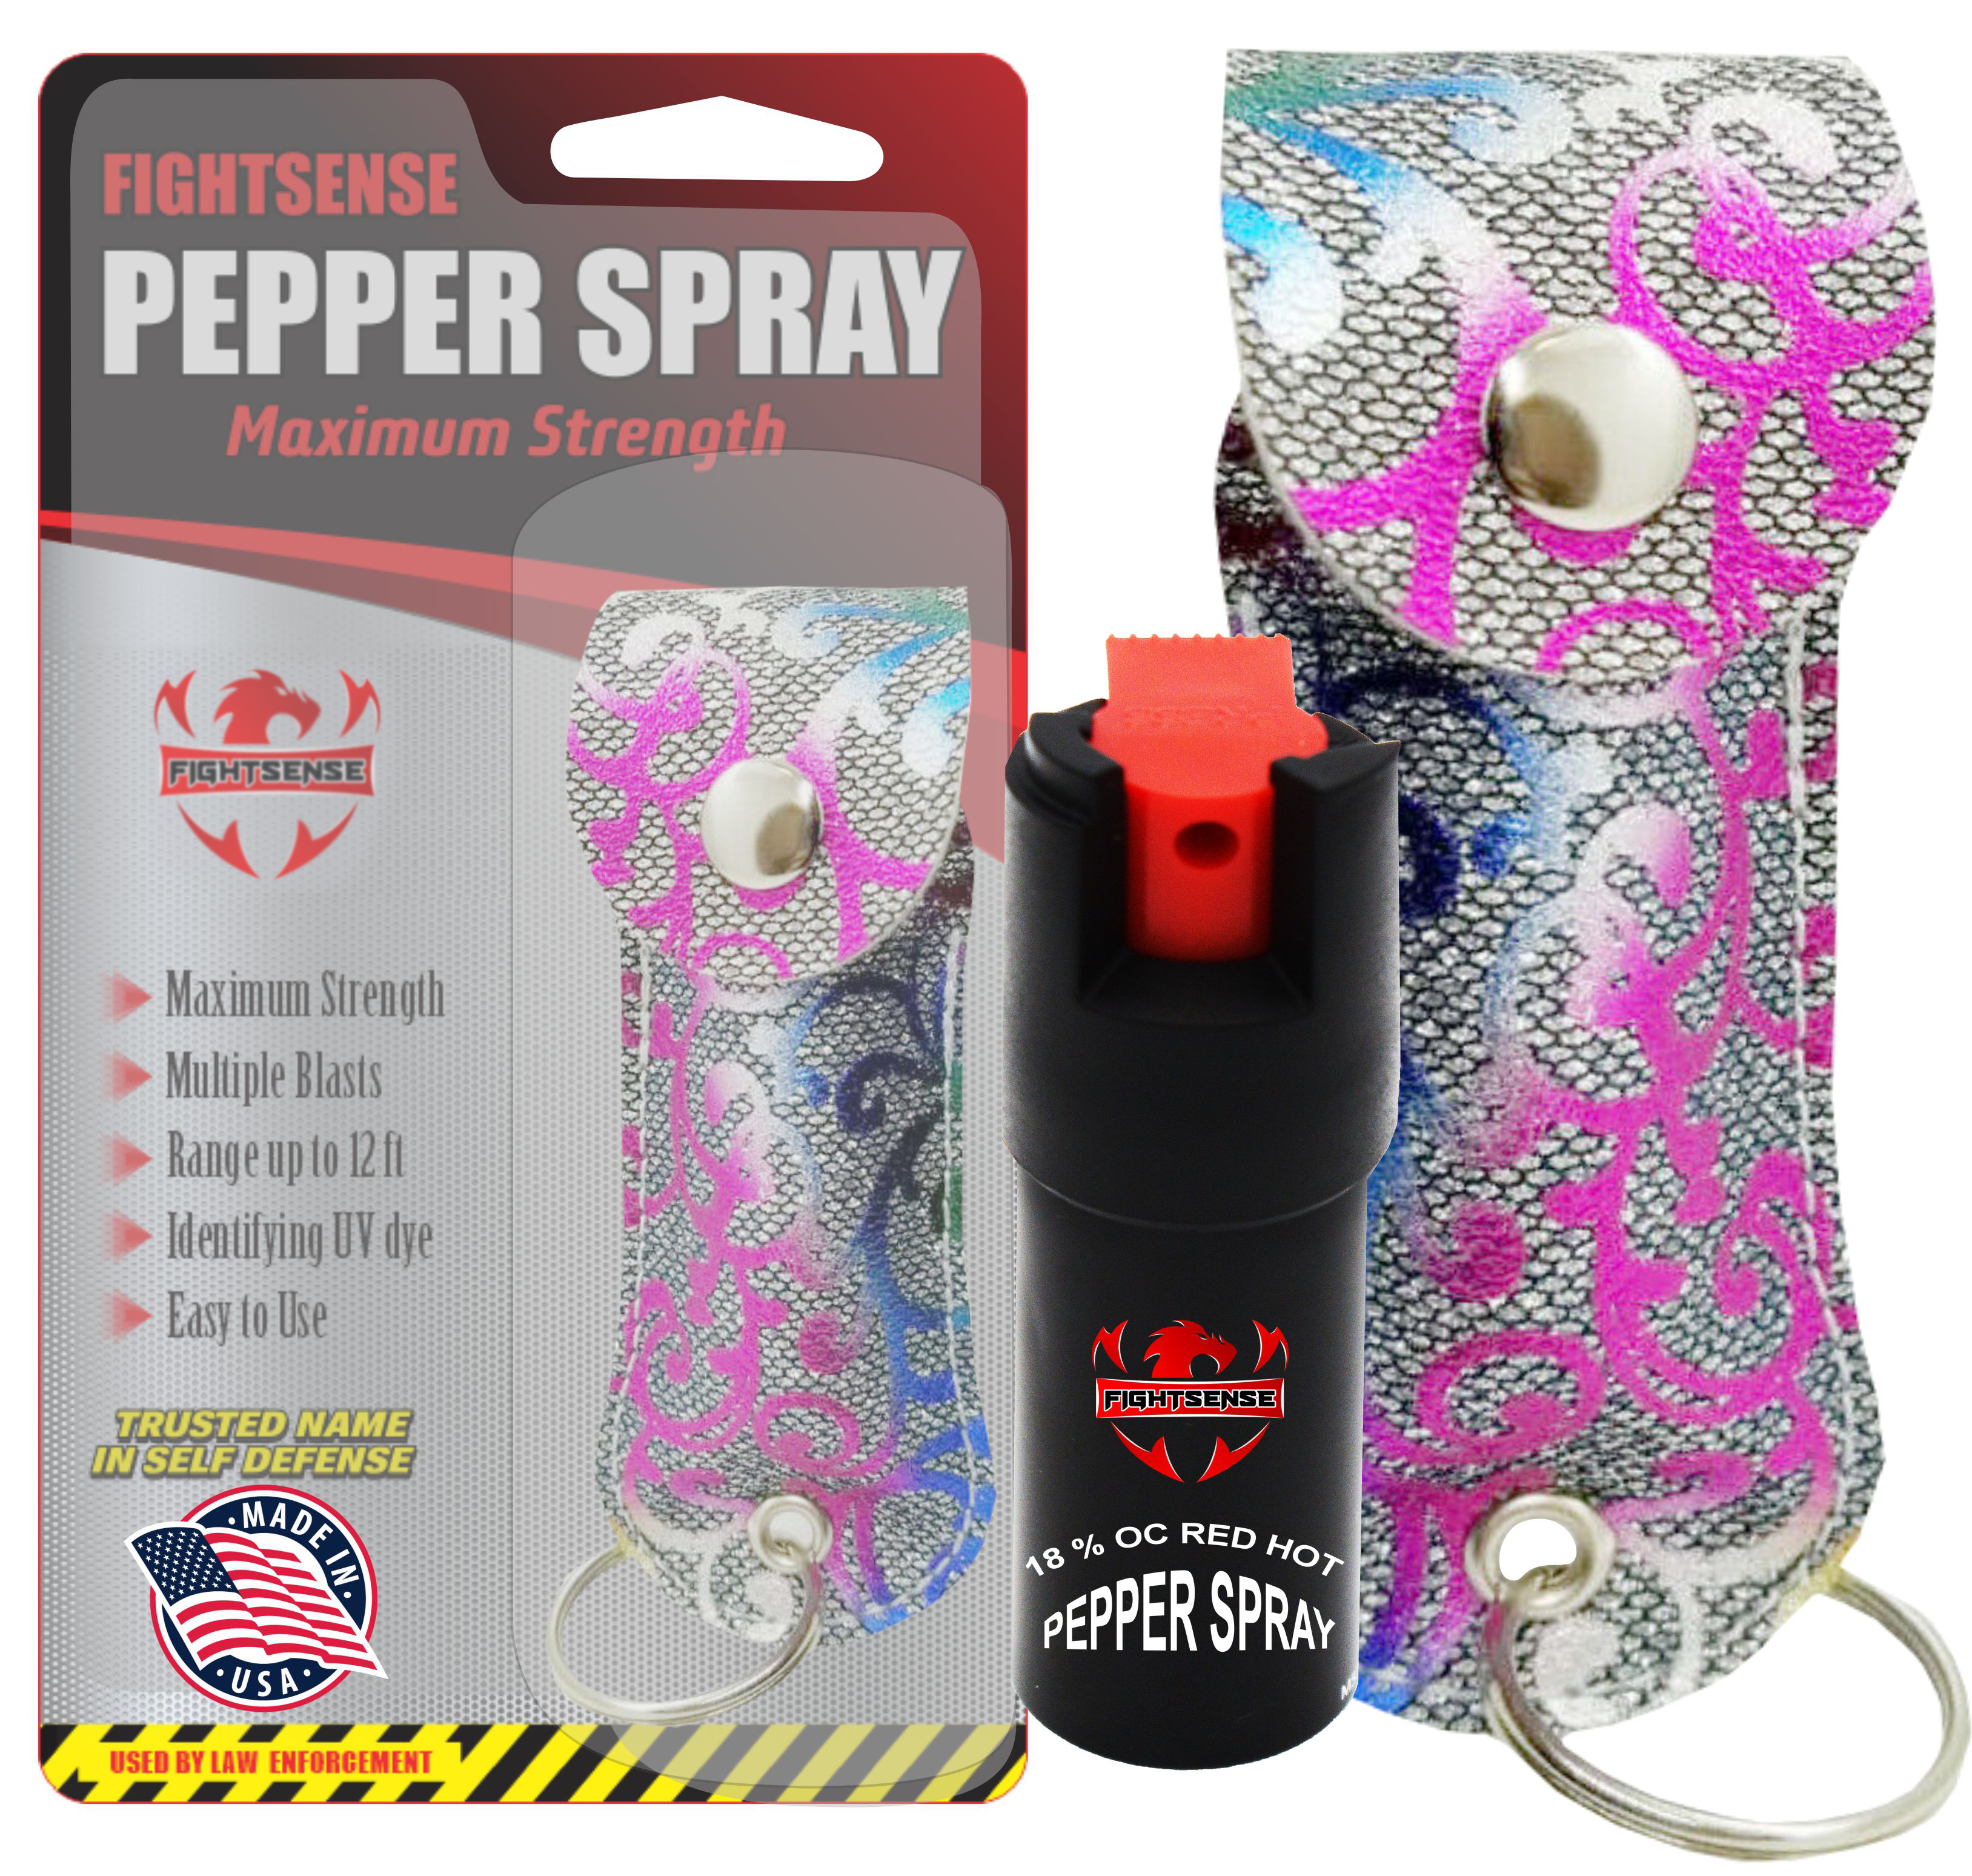  FIGHTSENSE Self Defense Pepper Spray - 1/2 oz Compact Size  Maximum Strength Police Grade Formula Best Self Defense Tool for Women  W/Leather Pouch Keychain (Black) : Sports & Outdoors